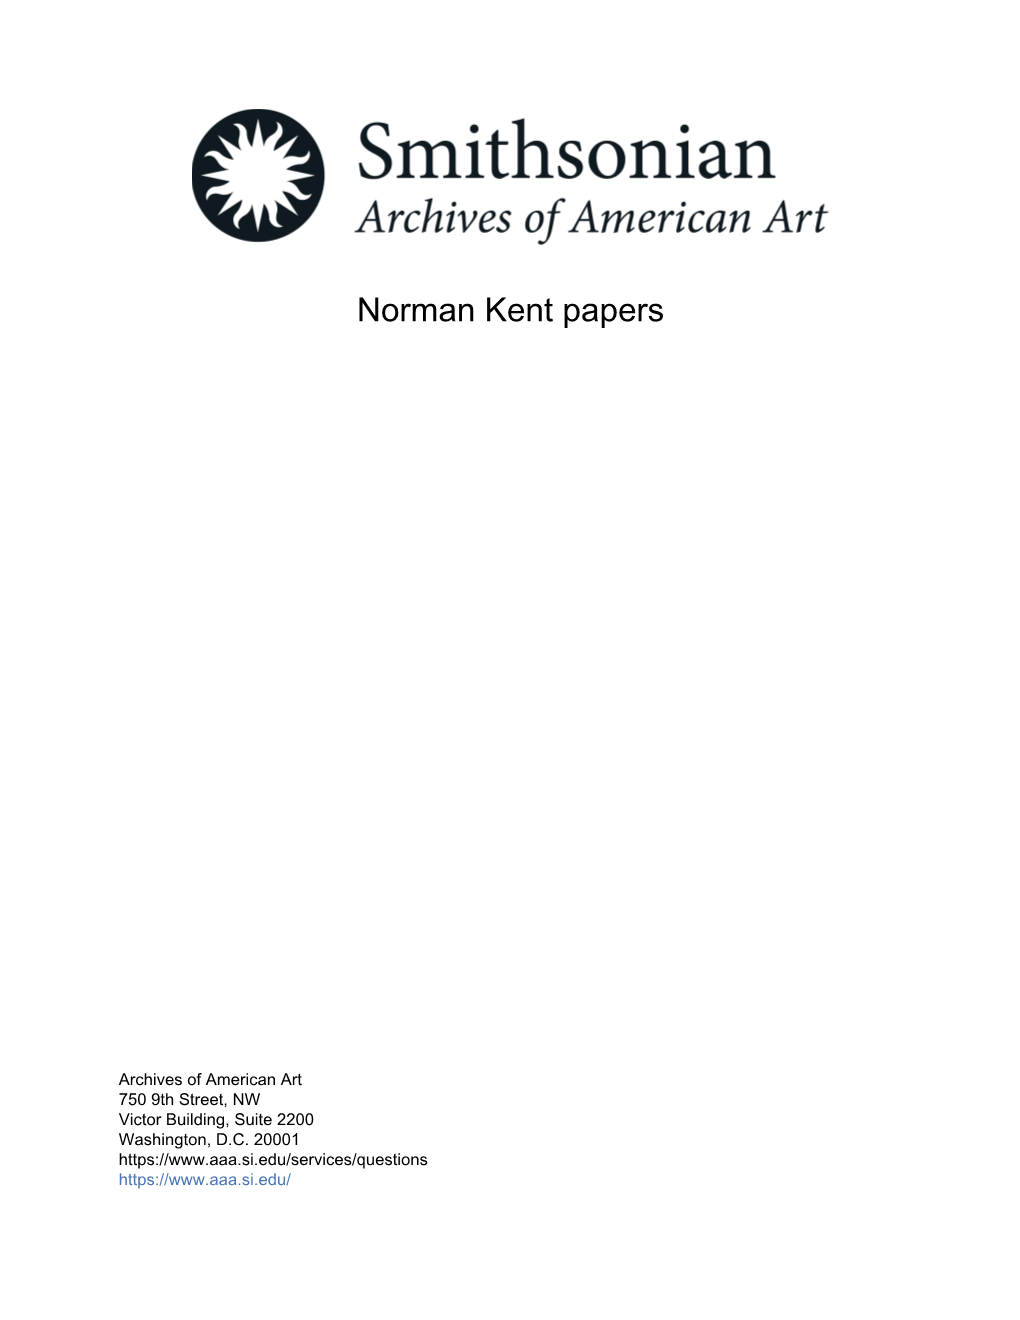 Norman Kent Papers